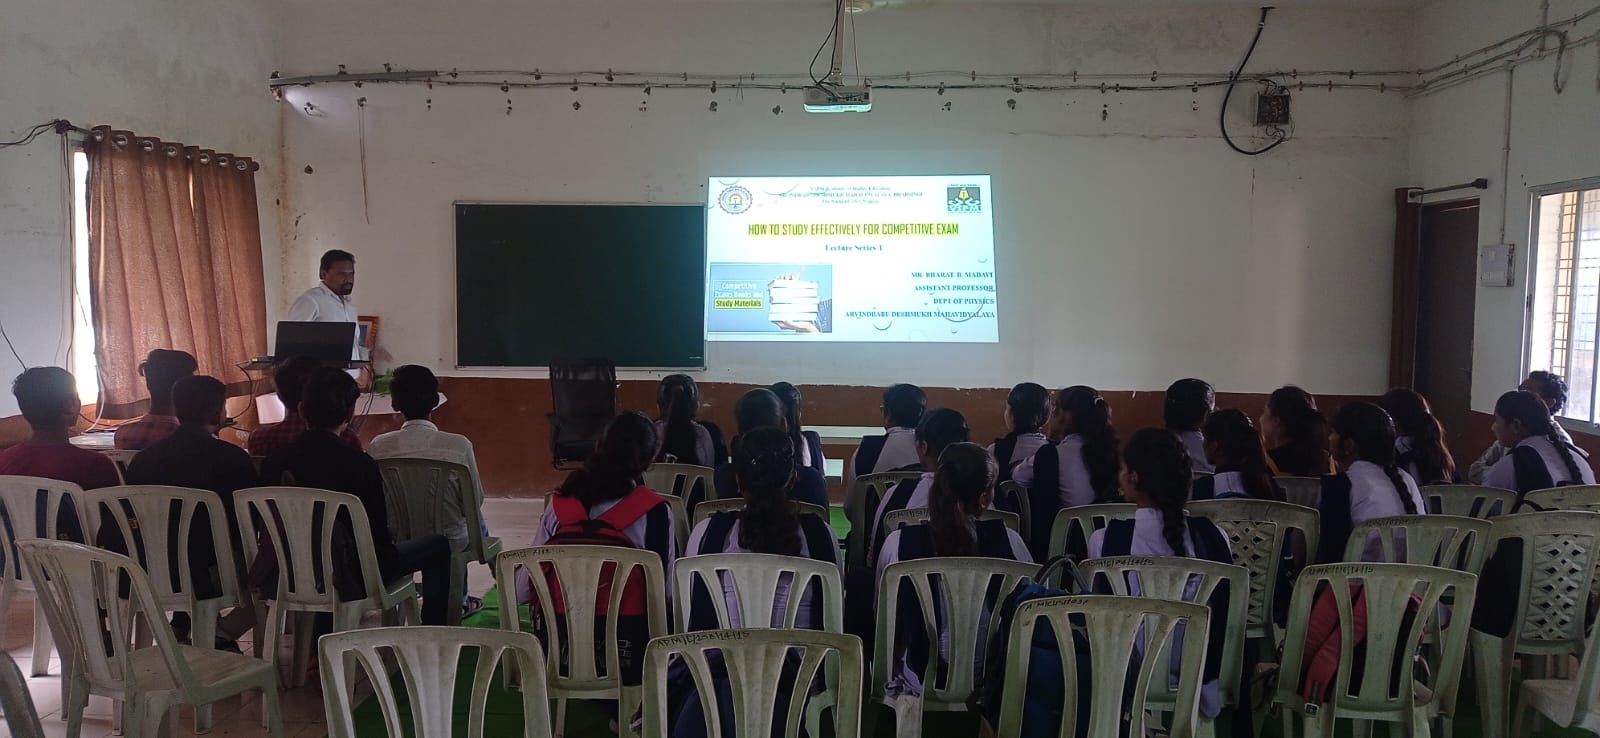 <p>A guest lecture was delivered by Mr. Bharat Madavi, Asst. Prof. in Physics on the topic&nbsp;&nbsp; &nbsp; &nbsp; &nbsp; &nbsp; &quot;How to study effectively for Competitive exams&quot;</p>

<p>Date: 9 Sept.2023.&nbsp;</p>
